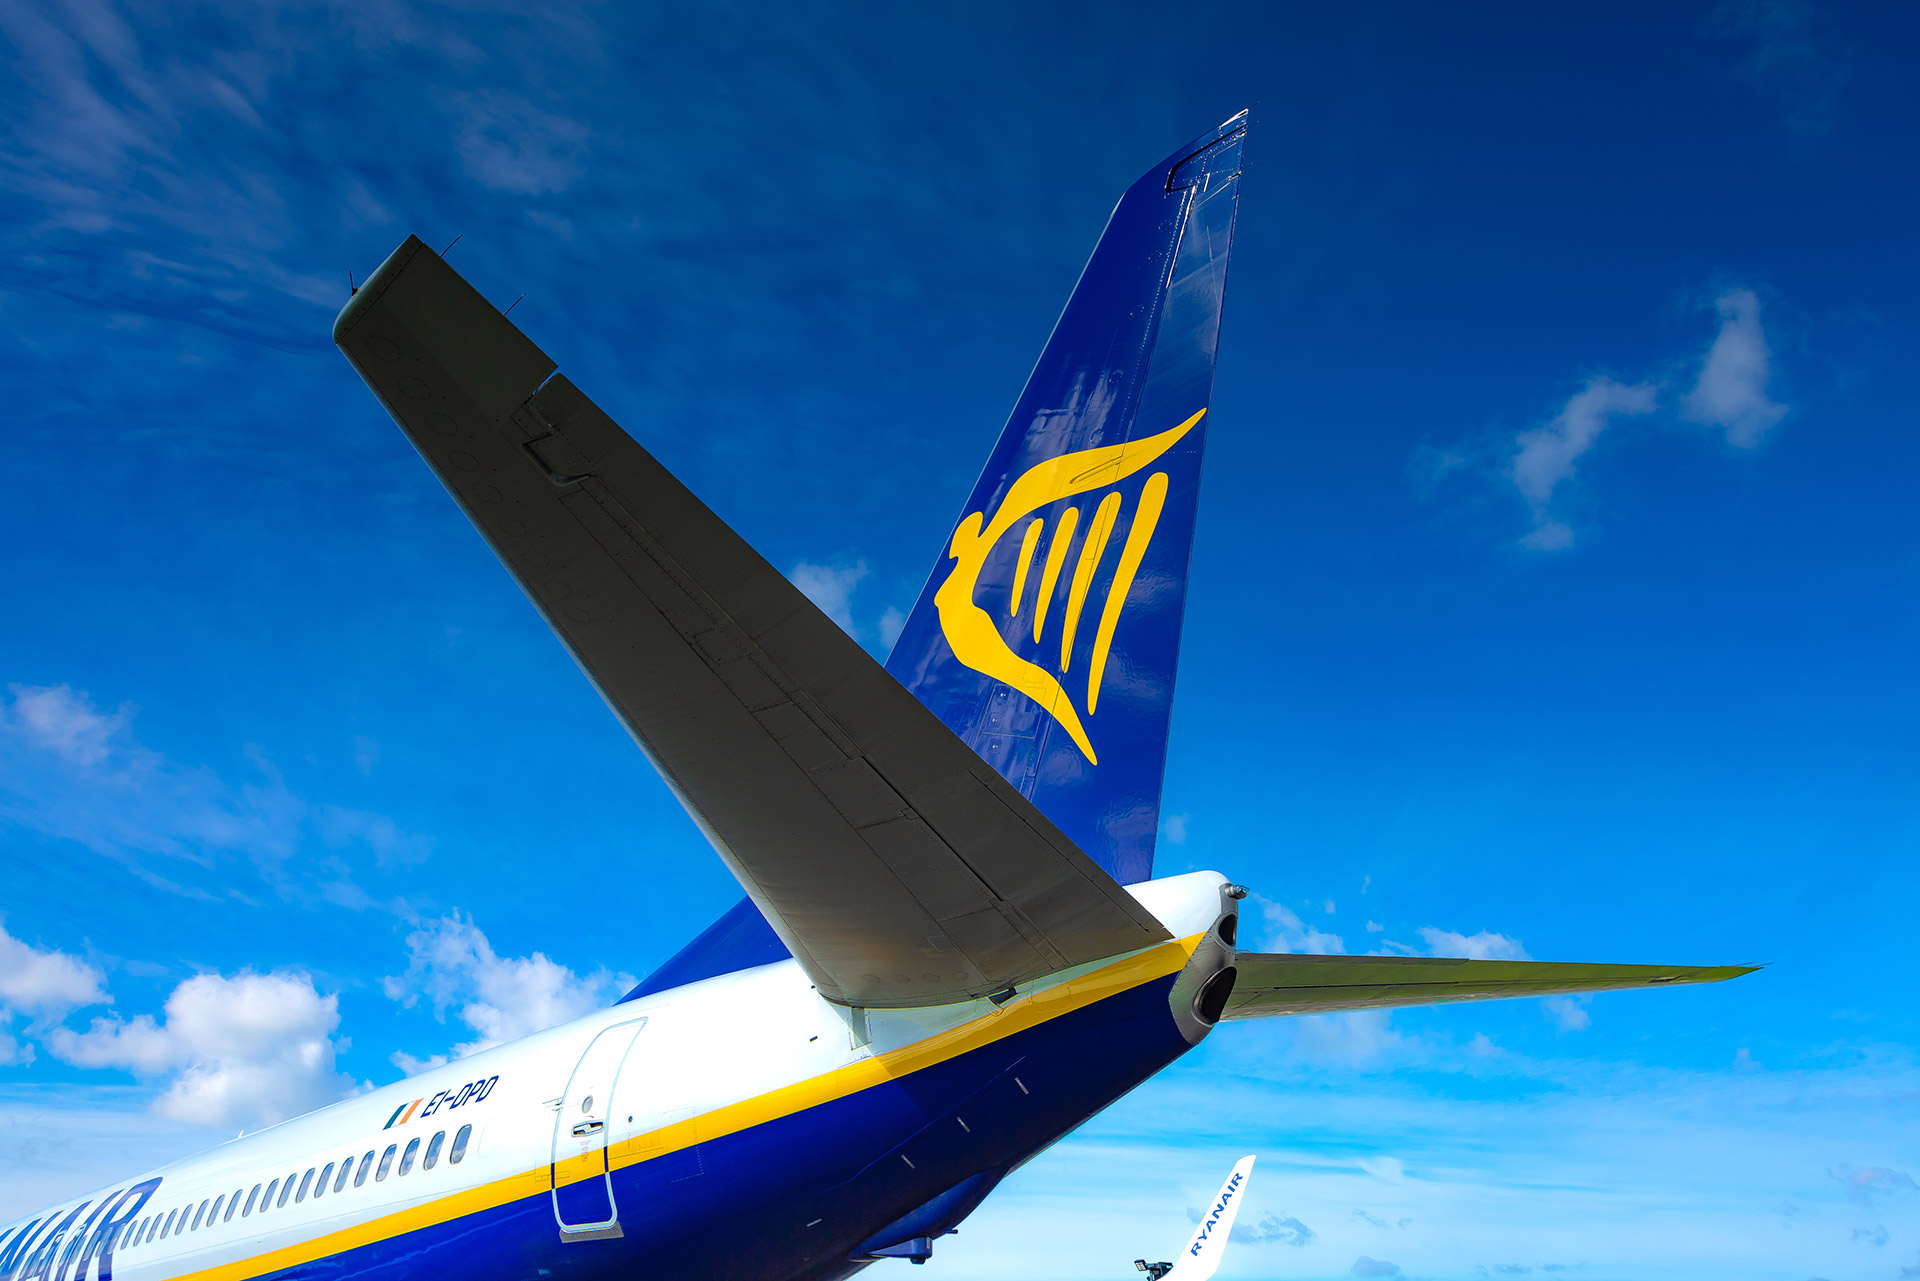 Tuesday 13th December 19:00 UTC: Join APC & Ryanair for a special event on Base Training!